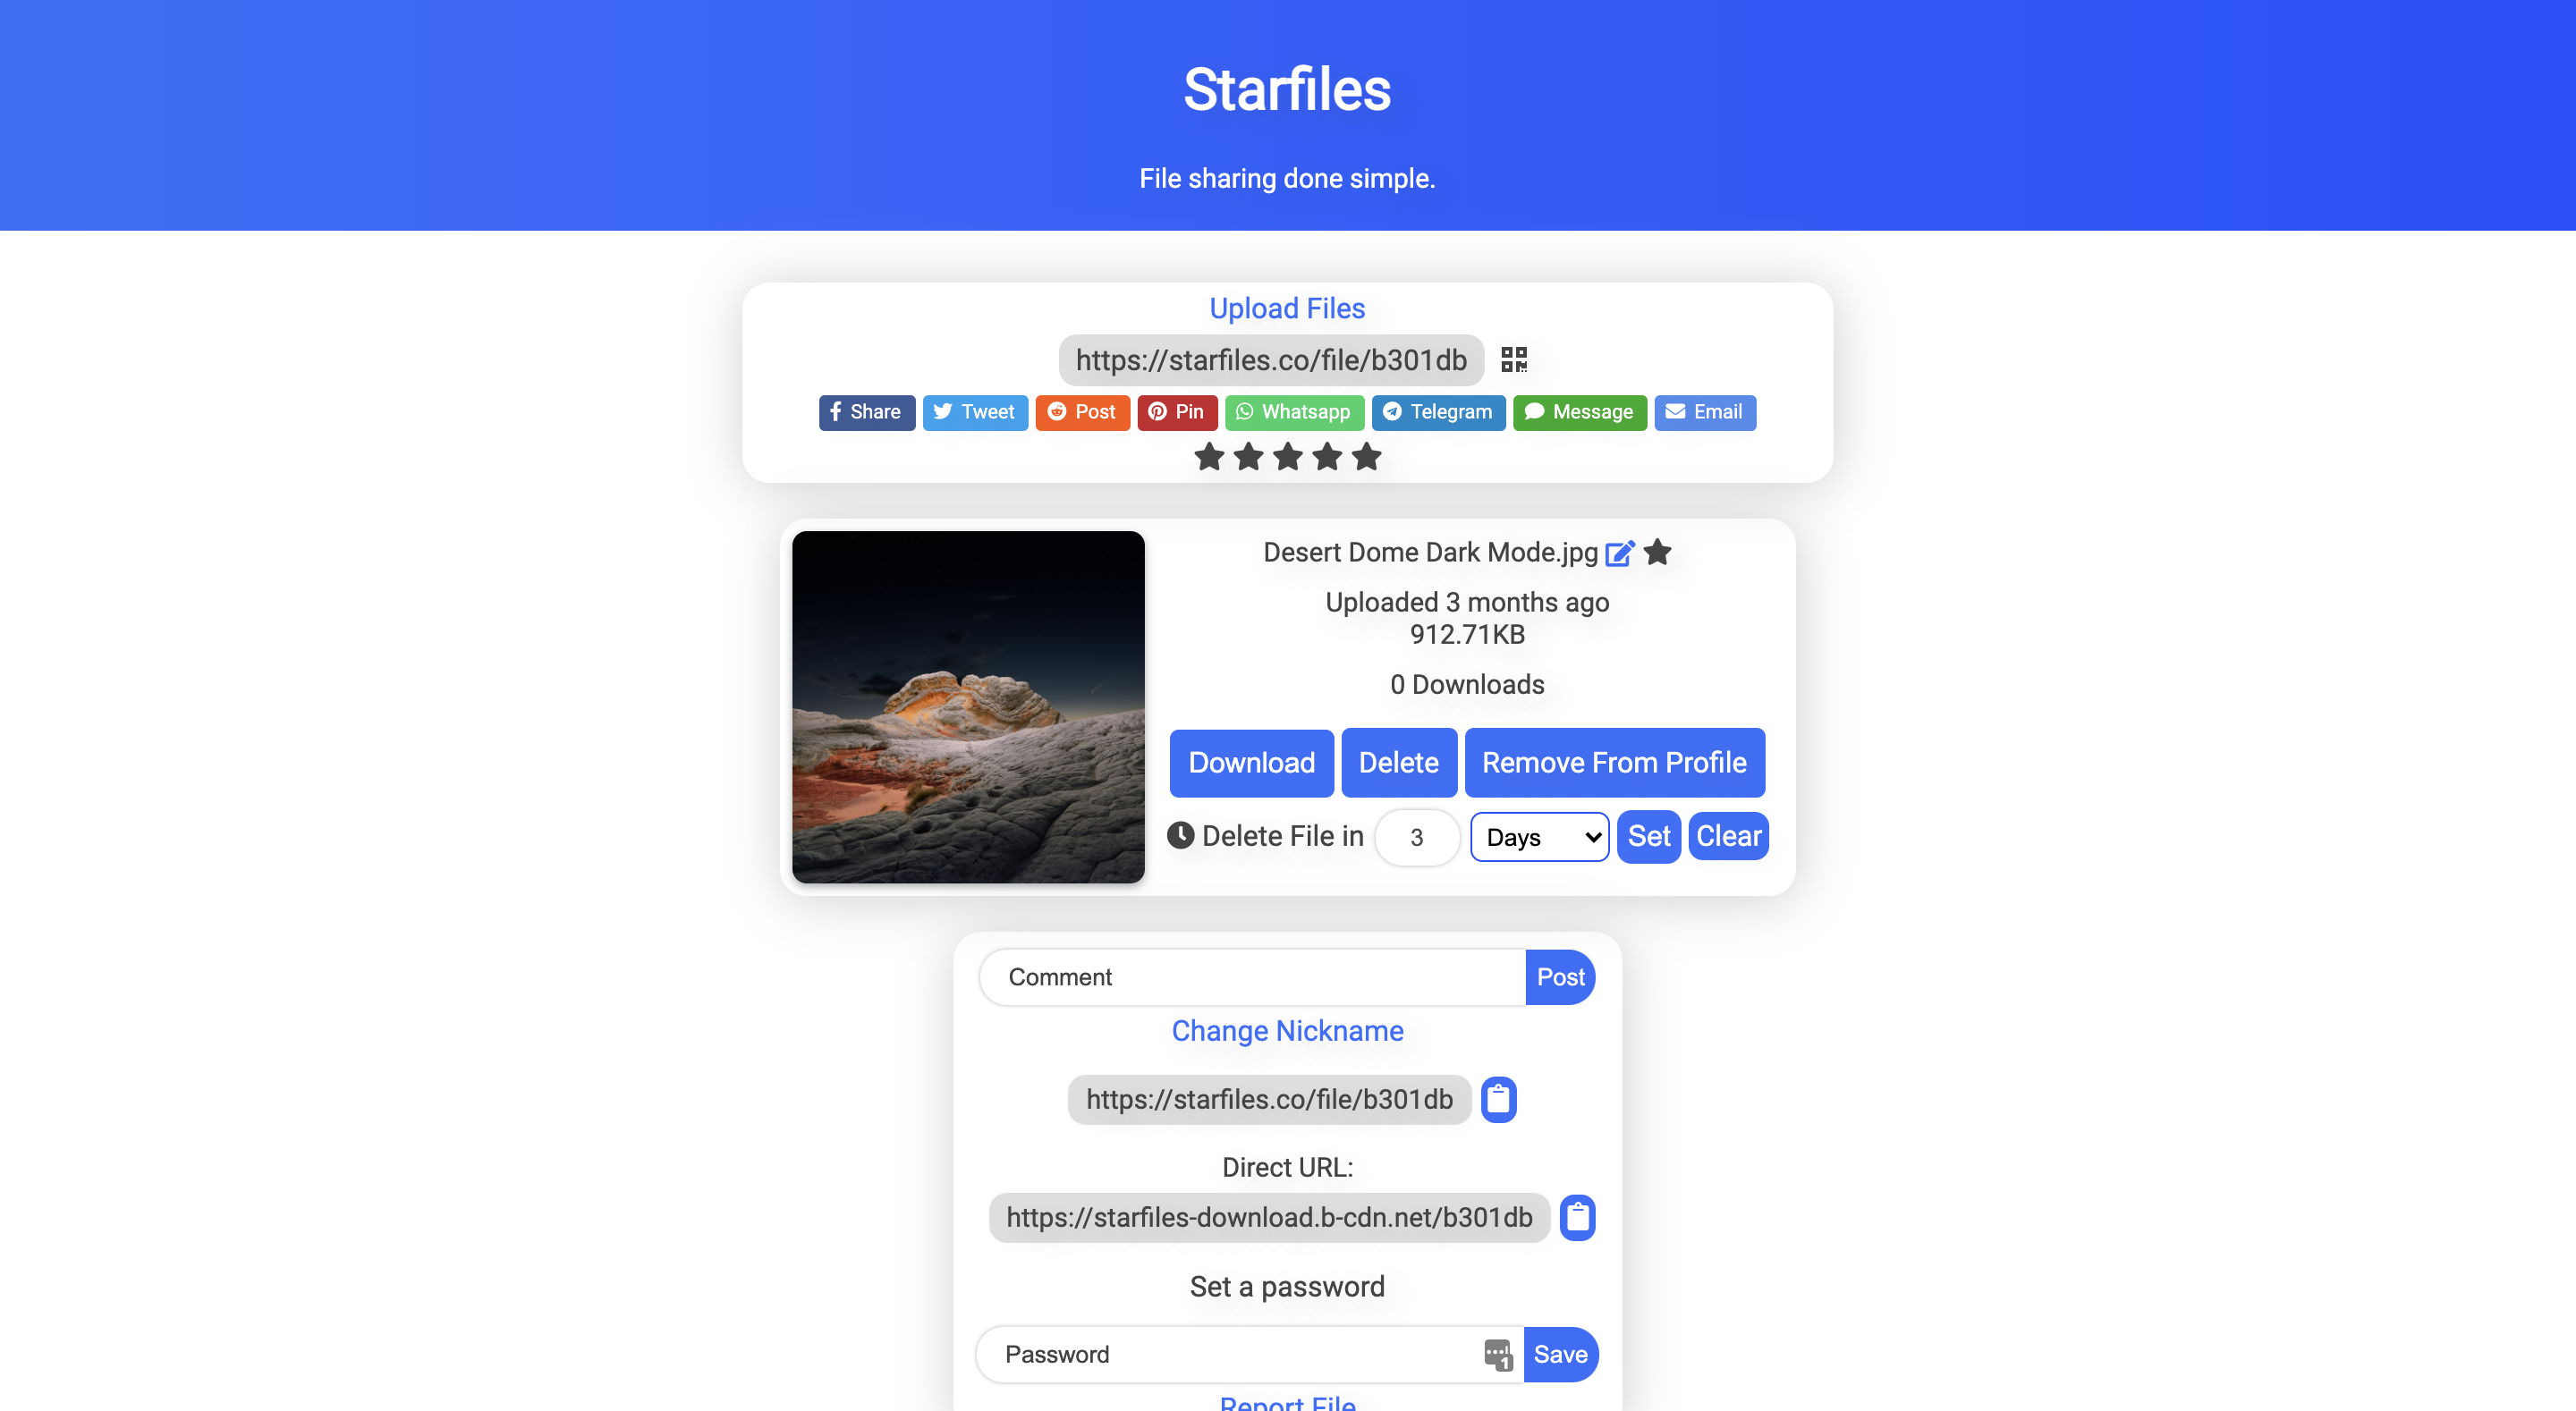 Get feedback from a vast remote working audience about Starfiles